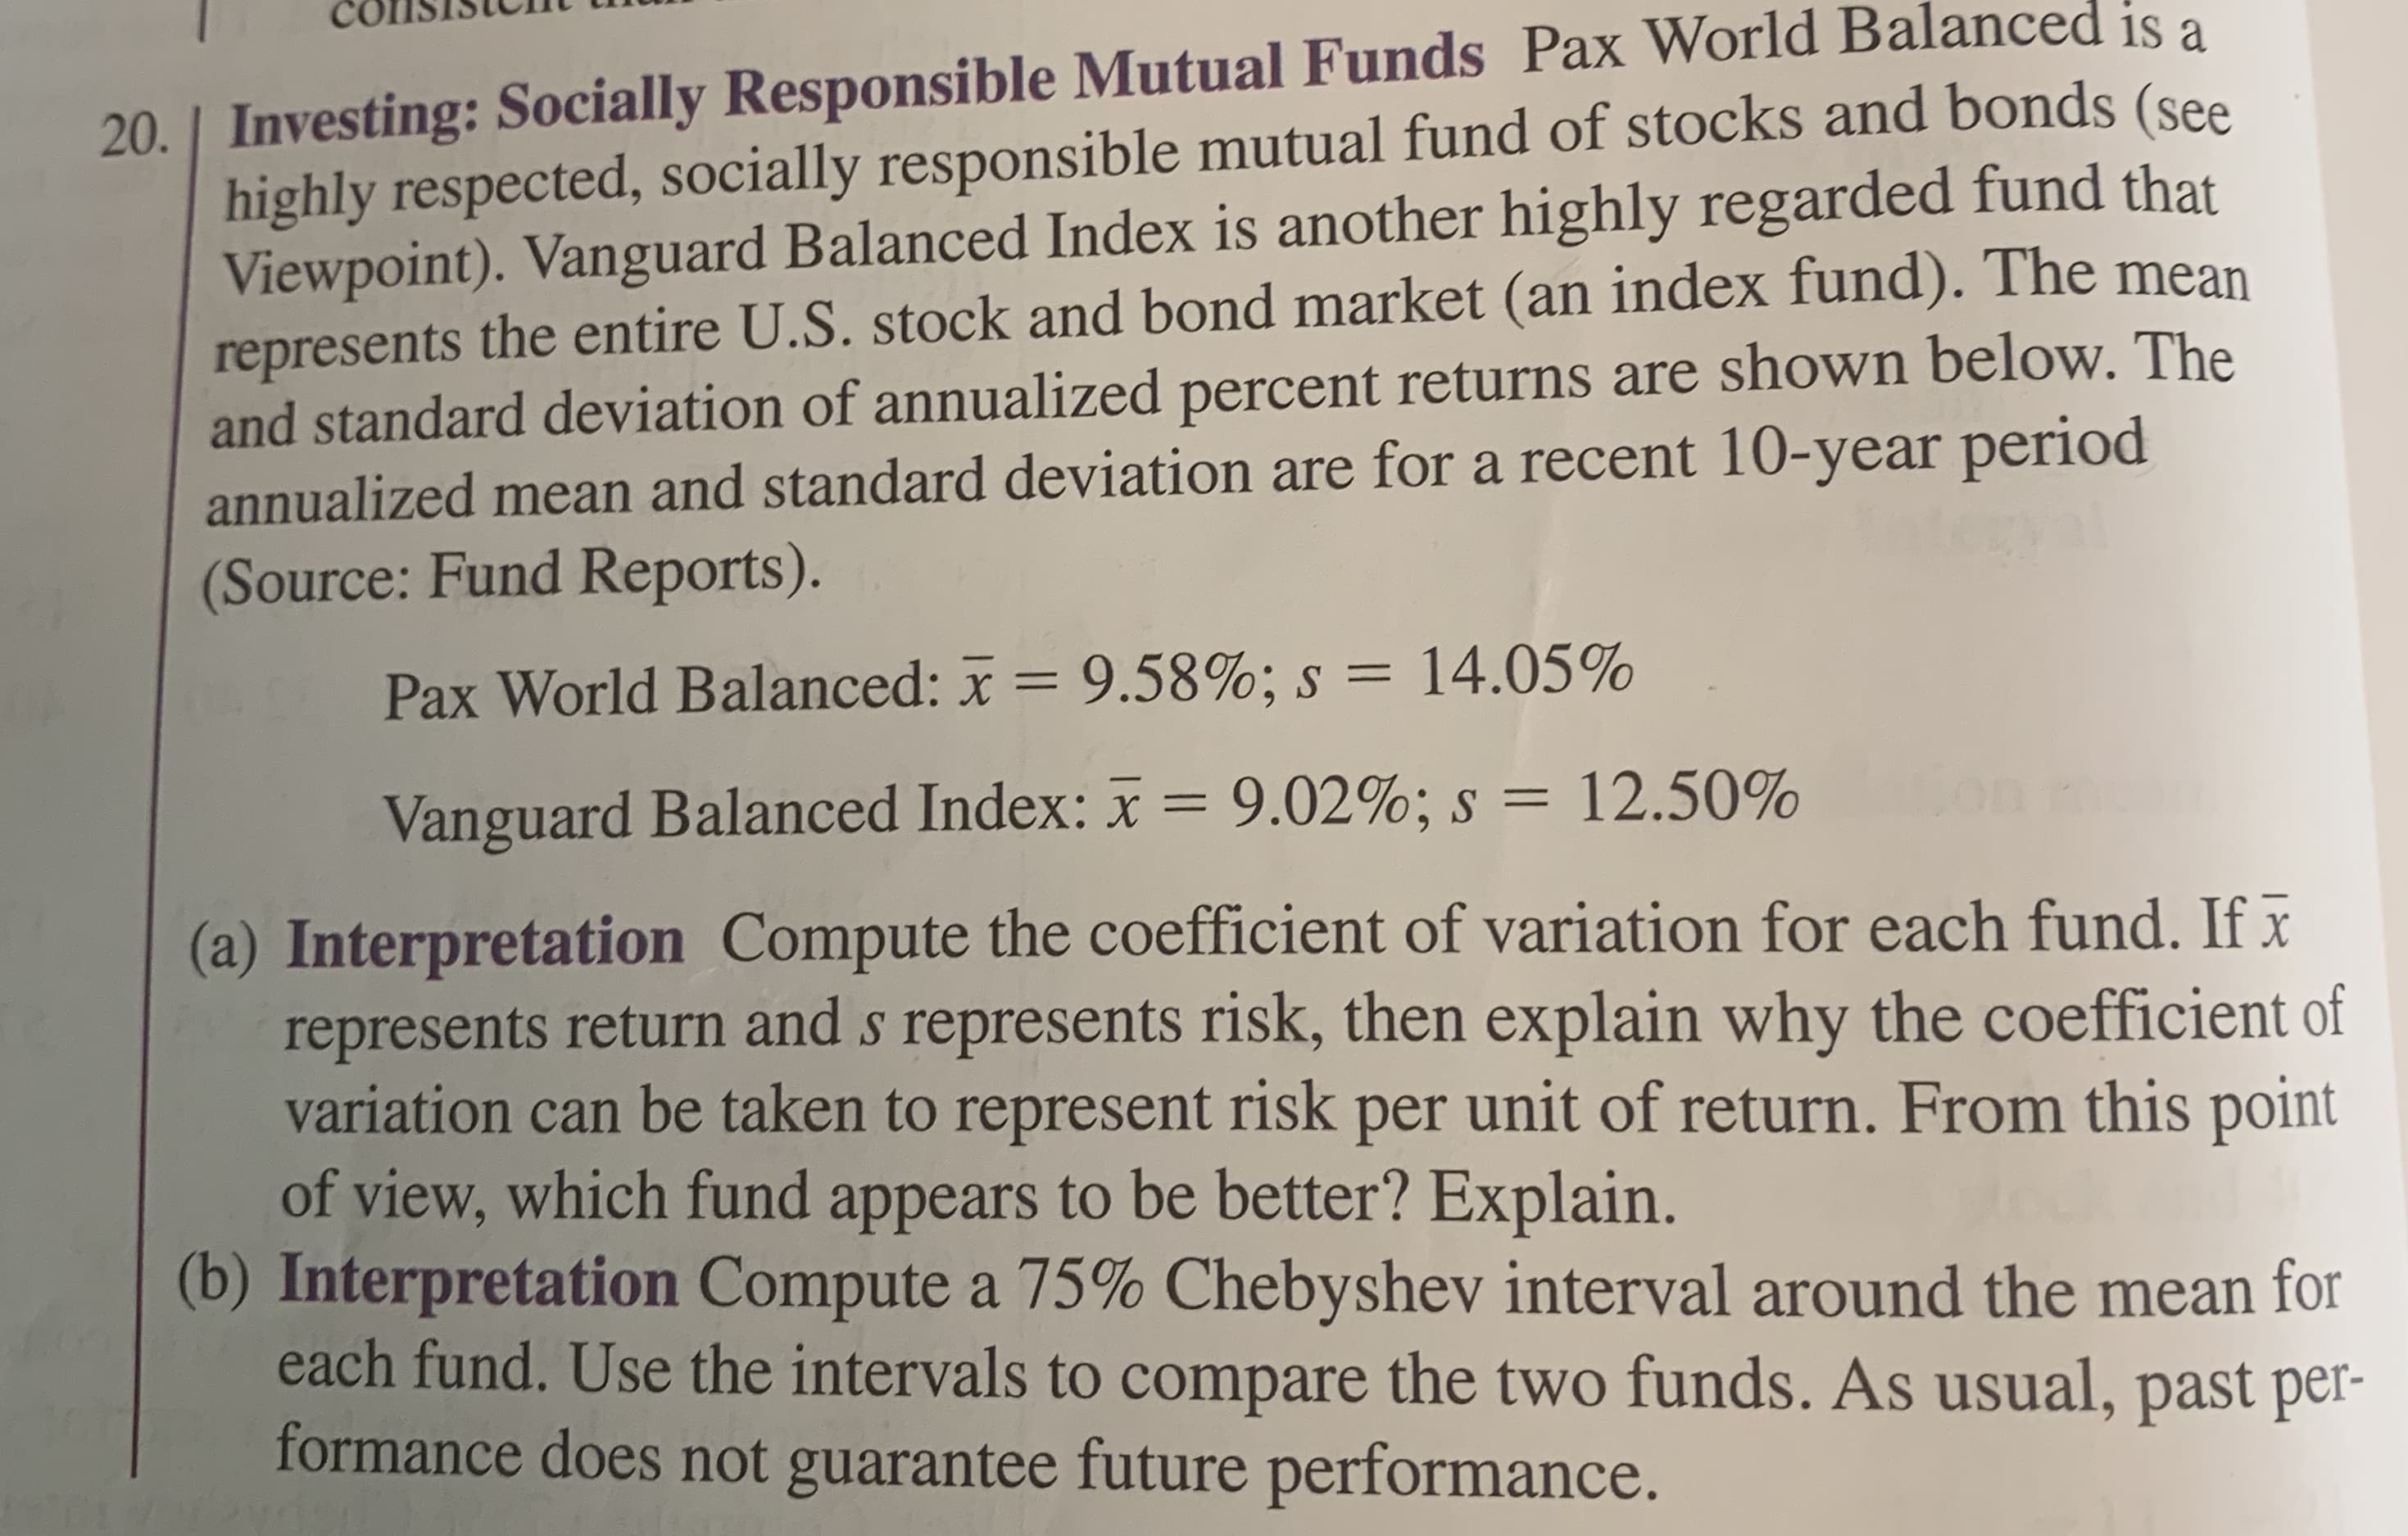 20. Investing: Socially Responsible Mutual Funds Pax World Balanced is a
highly respected, socially responsible mutual fund of stocks and bonds (see
Viewpoint). Vanguard Balanced Index is another highly regarded fund that
represents the entire U.S. stock and bond market (an index fund). The mean
and standard deviation of annualized percent returns are shown below. The
annualized mean and standard deviation are for a recent 10-year period
(Source: Fund Reports).
Pax World Balanced: x 9.58%; s = 14.05%
Vanguard Balanced Index: x
9.02%; s = 12.50%
(a) Interpretation Compute the coefficient of variation for each fund. Ifx
represents return and s represents risk, then explain why the coefficient of
variation can be taken to represent risk per unit of return. From this point
of view, which fund appears to be better? Explain.
(b) Interpretation Compute a 75% Chebyshev interval around the mean for
each fund. Use the intervals to compare the two funds. As usual, past per-
formance does not guarantee future performance.
